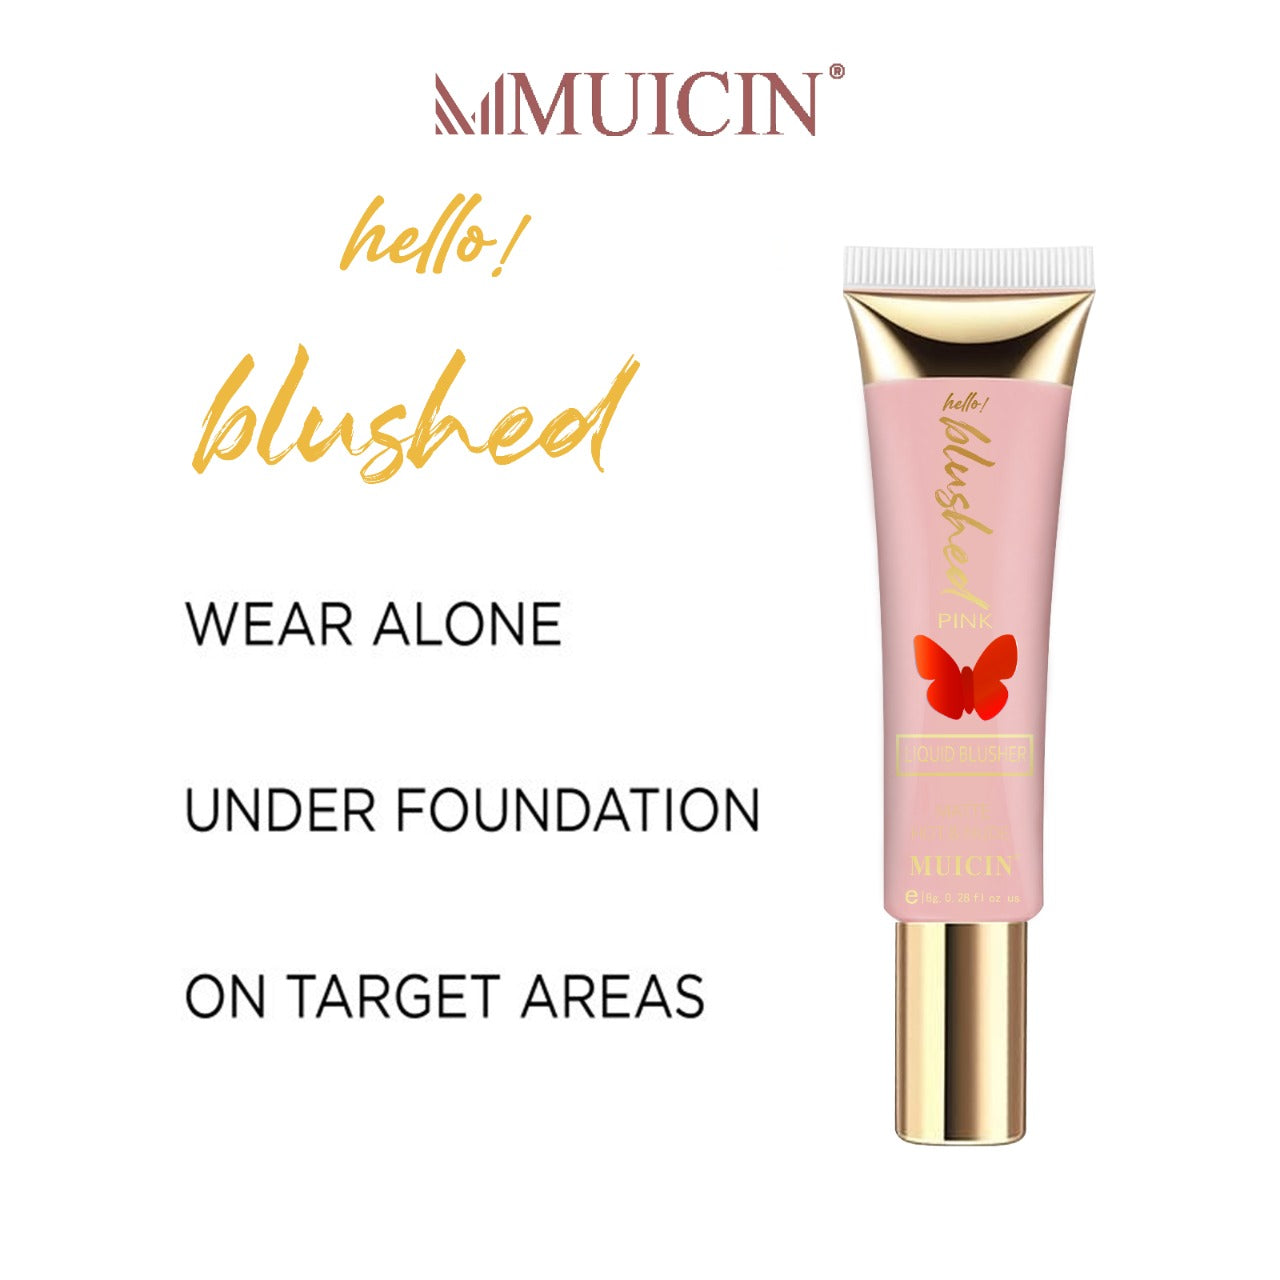 MUICIN - BUTTERFLY PINK BLUSHED TUBE - 8 G